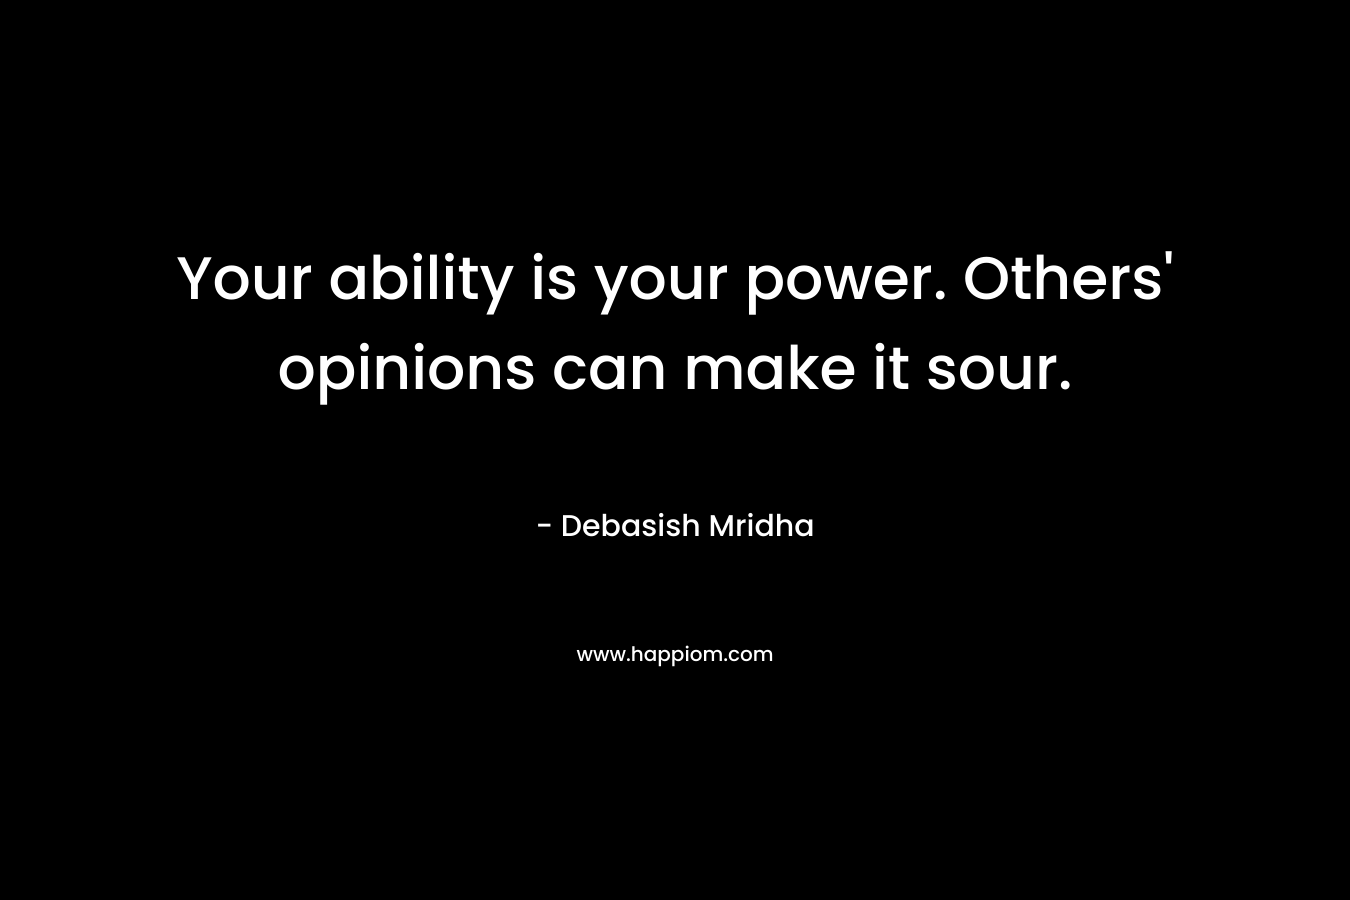 Your ability is your power. Others' opinions can make it sour.